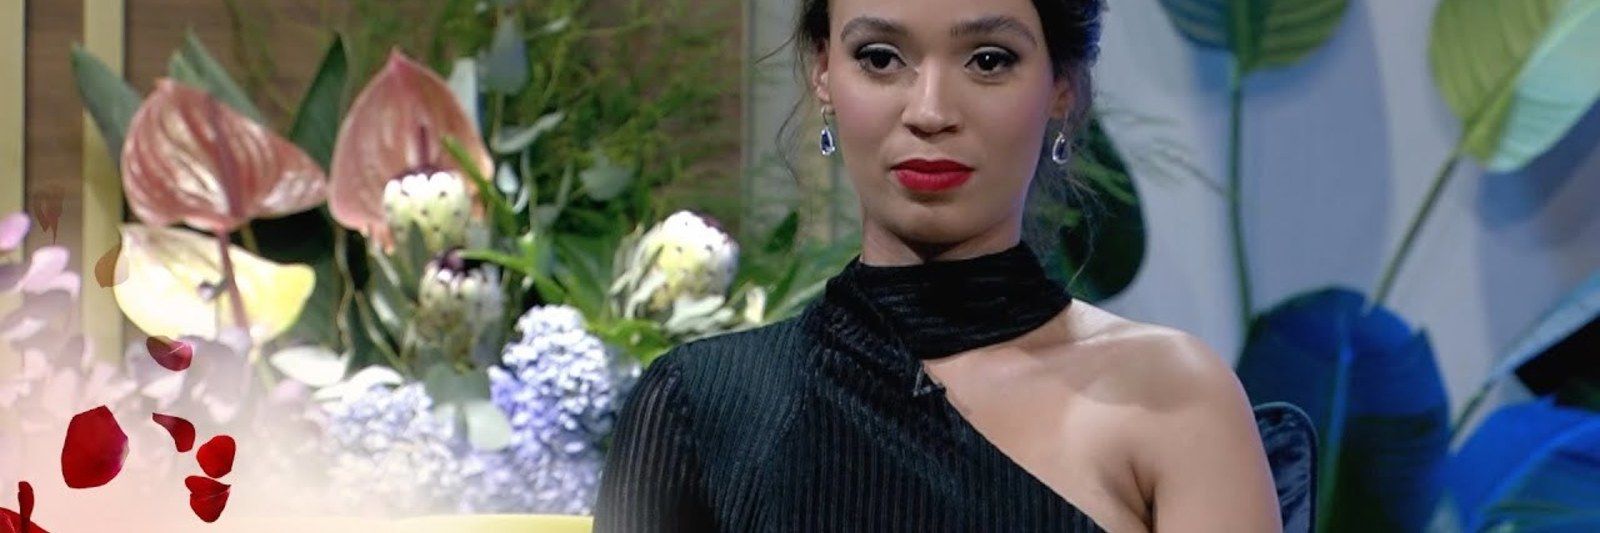 ‘I was angry in that moment’ – The Bachelorette SA